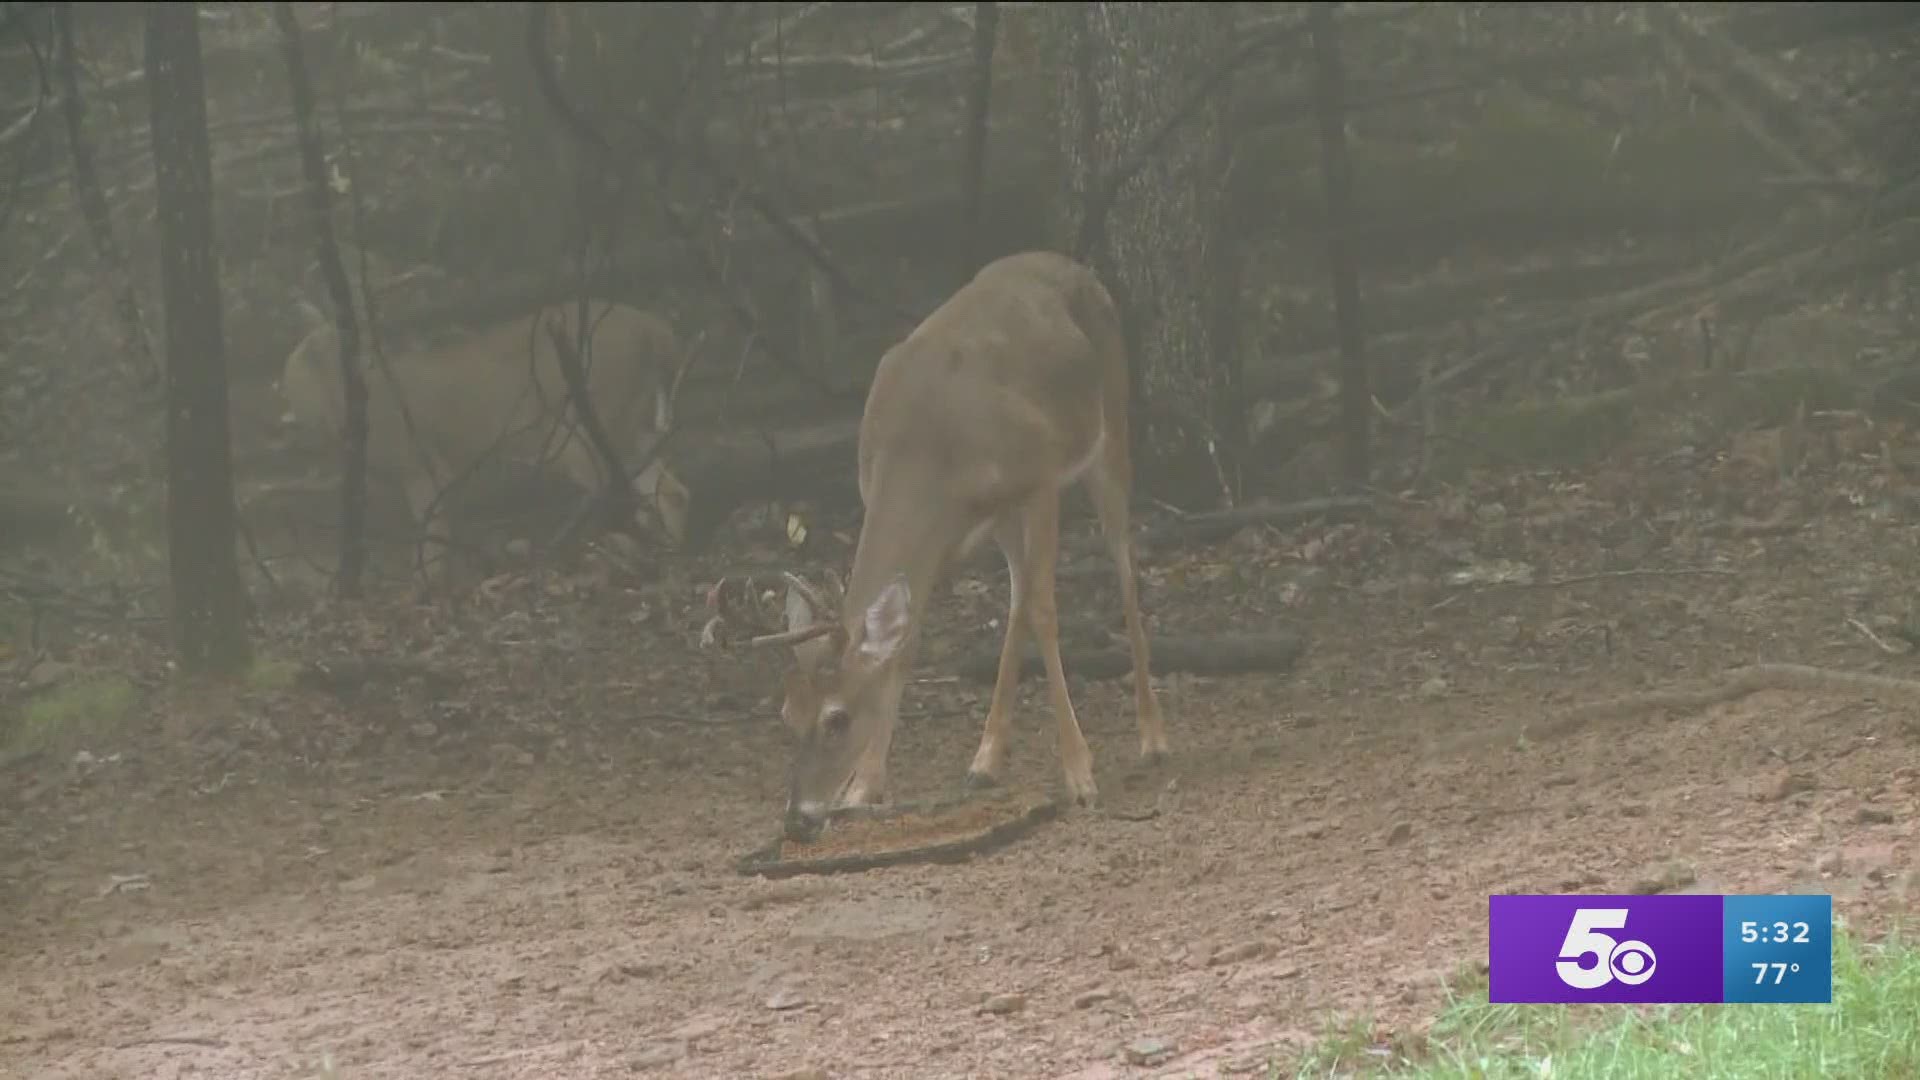 Wildlife officers urge hunters to call ahead before taking deer to be processed because many are backed up.